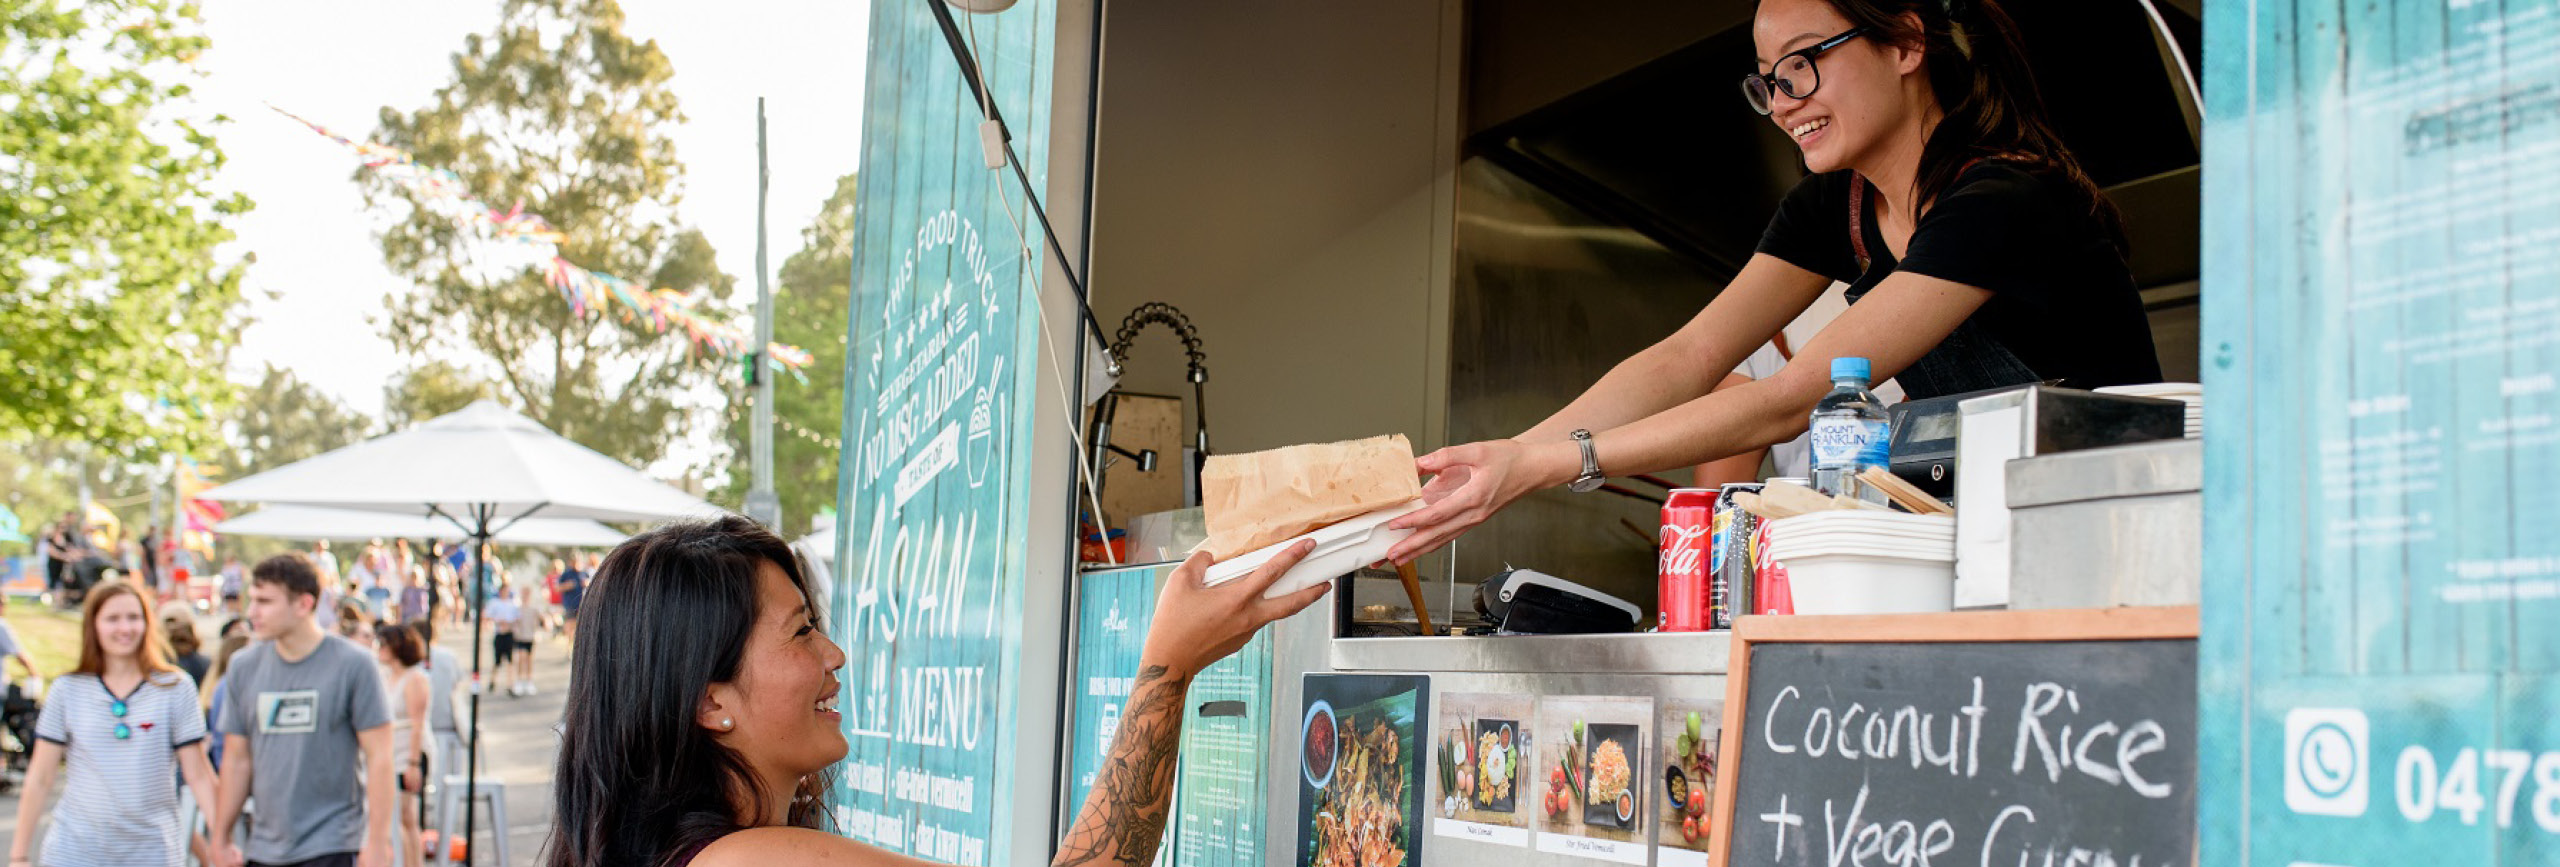 Woman receiving food from a food truck